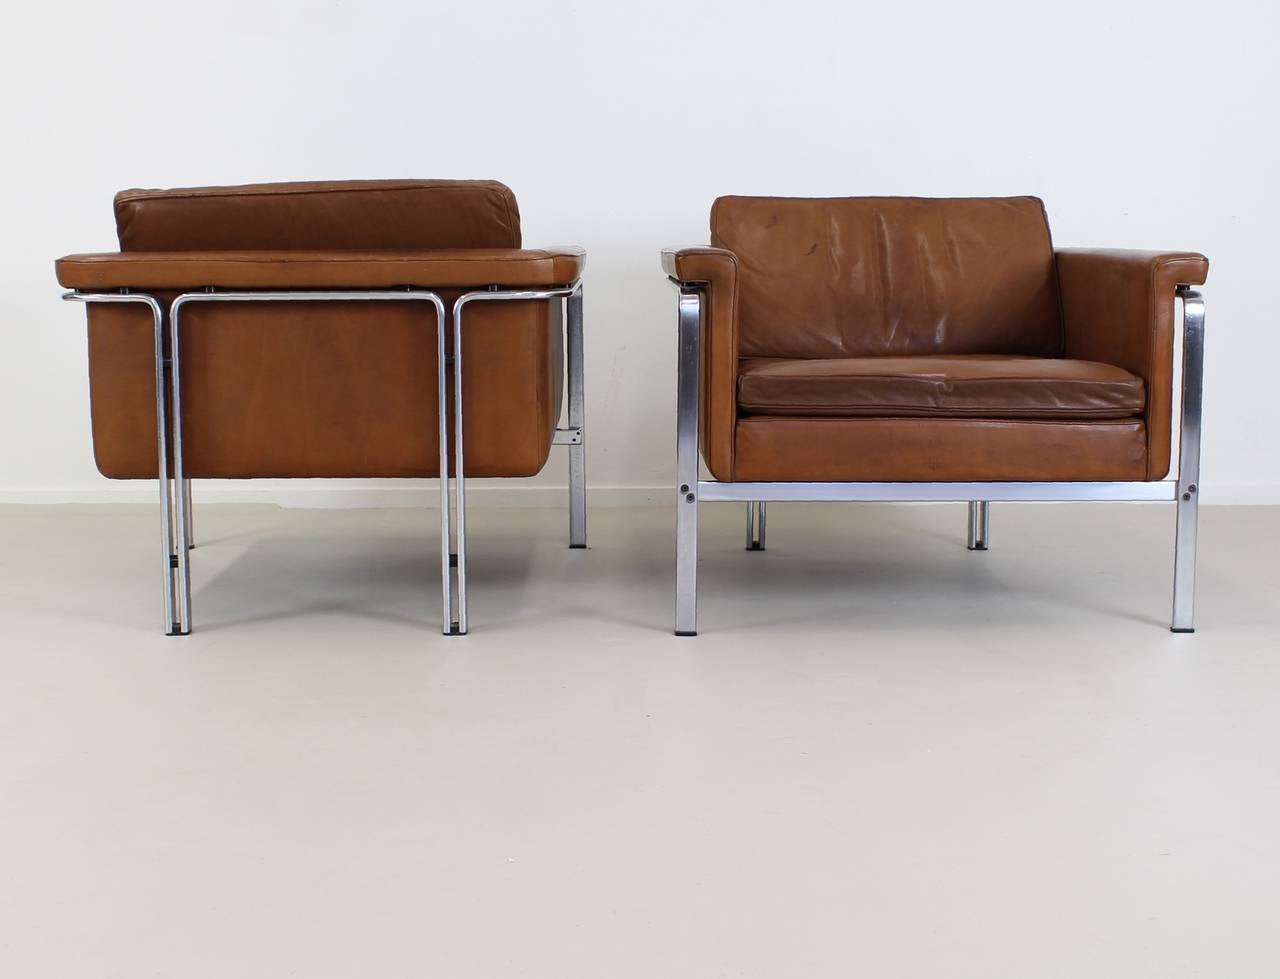 Top quality design chairs.
Chrome plate chairs.
Nice brown patinated leather upholstered.
Model: 69 10.
All Kill International original production.